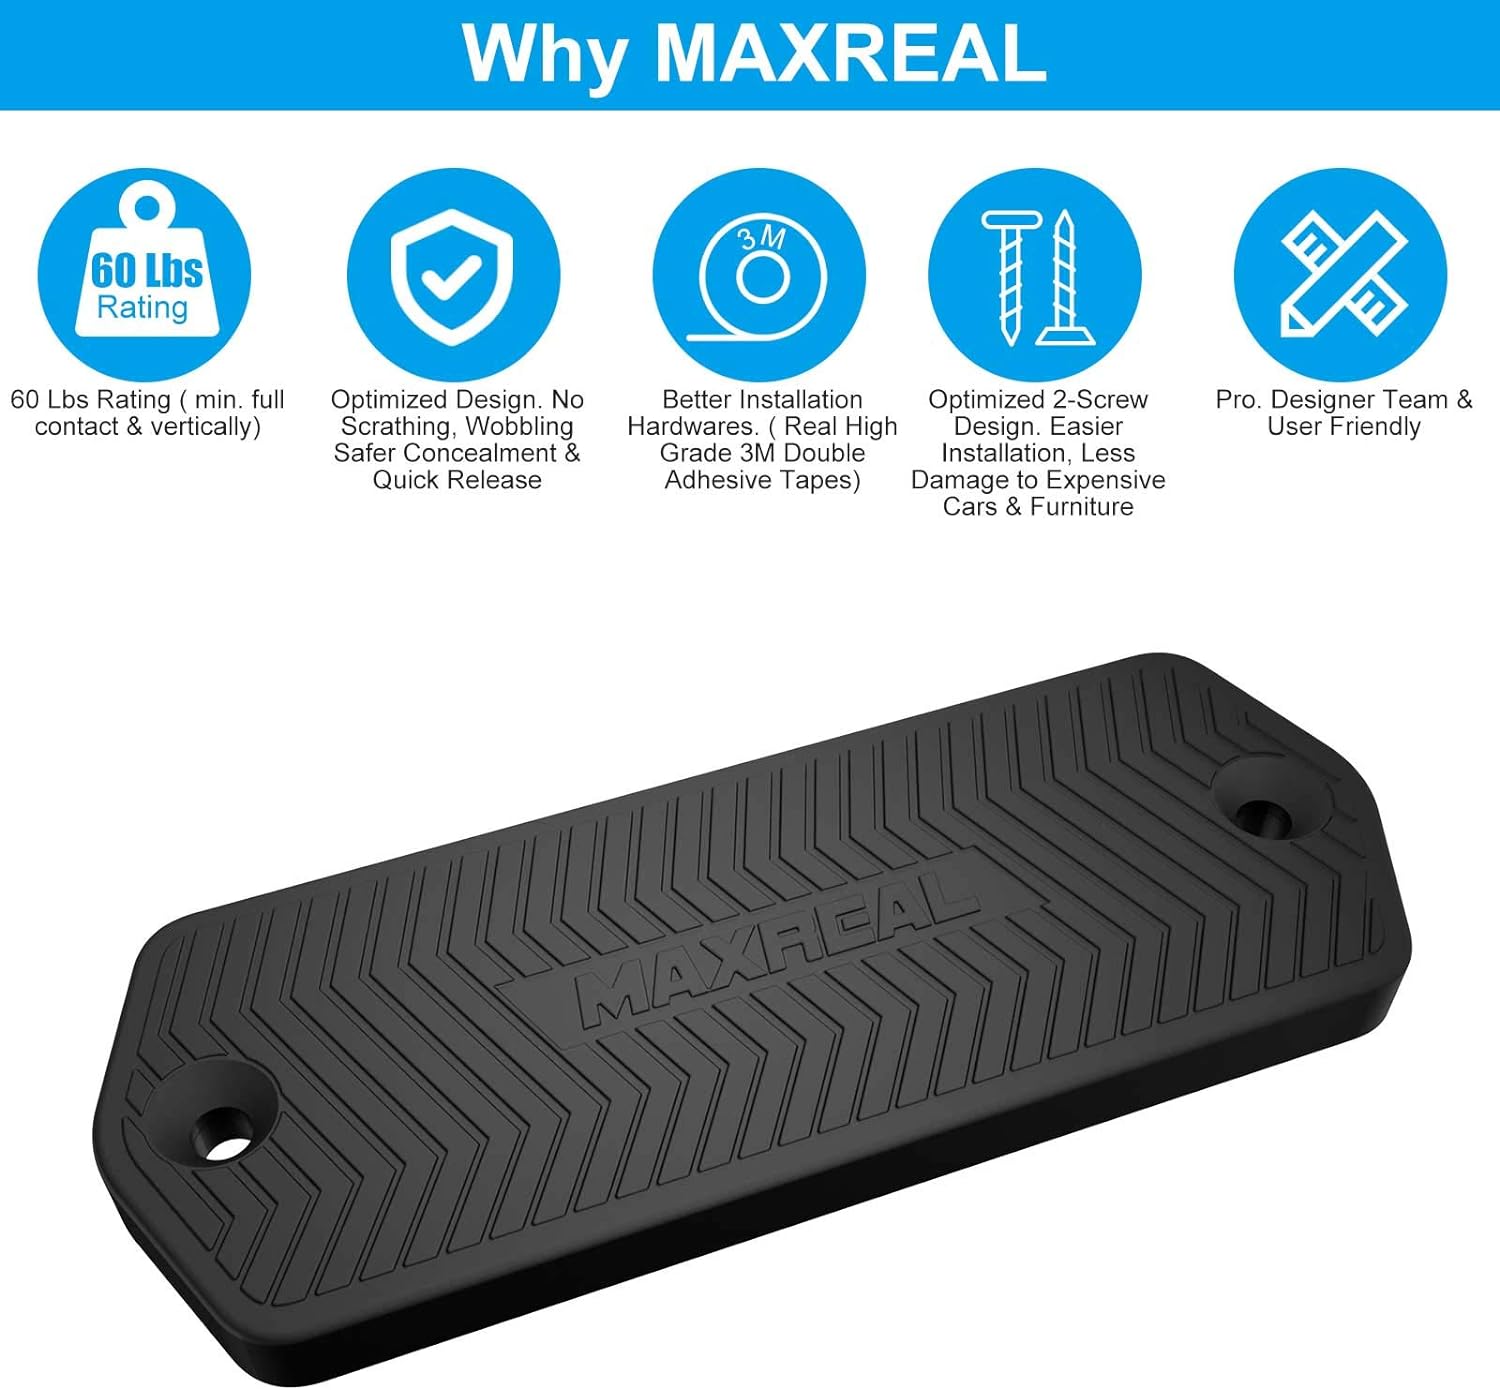 MAXREAL Magnetic Gun Mount for Vehicle & Home 58 lbs. rated.